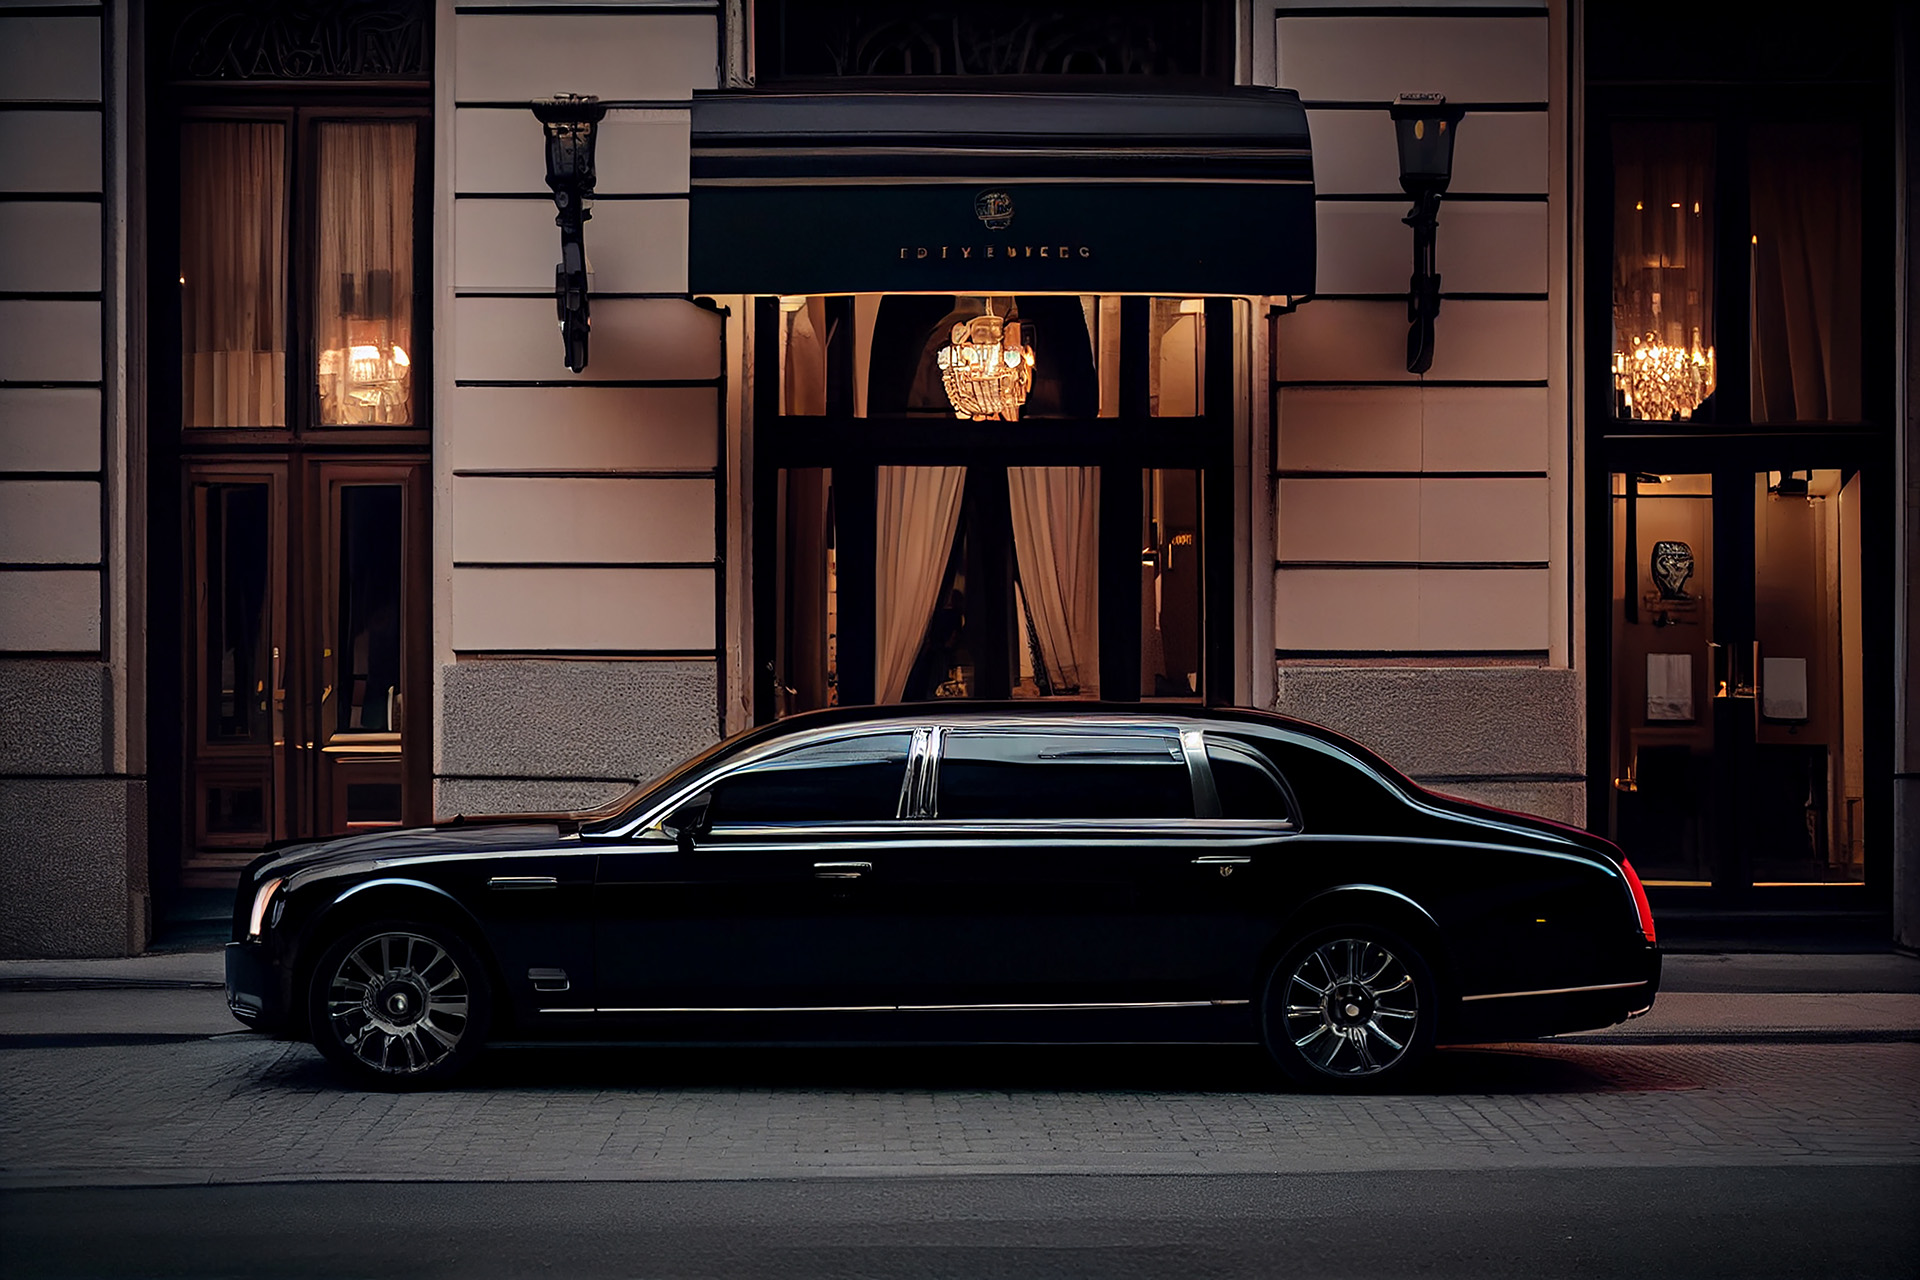 A black limo parked in front of a building.